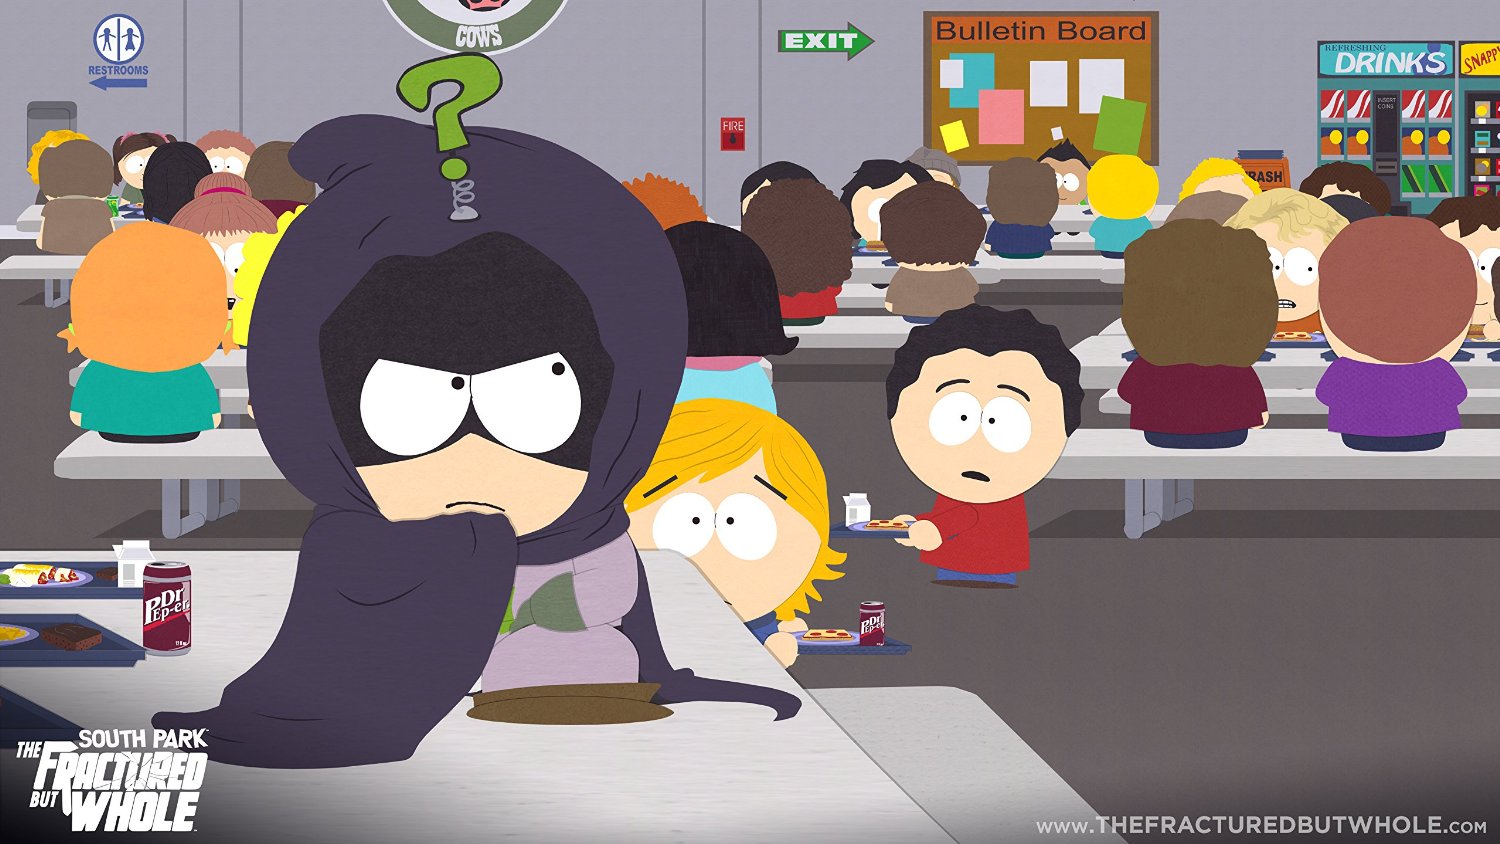 South Park: The Fractured but Whole screenshot 3517